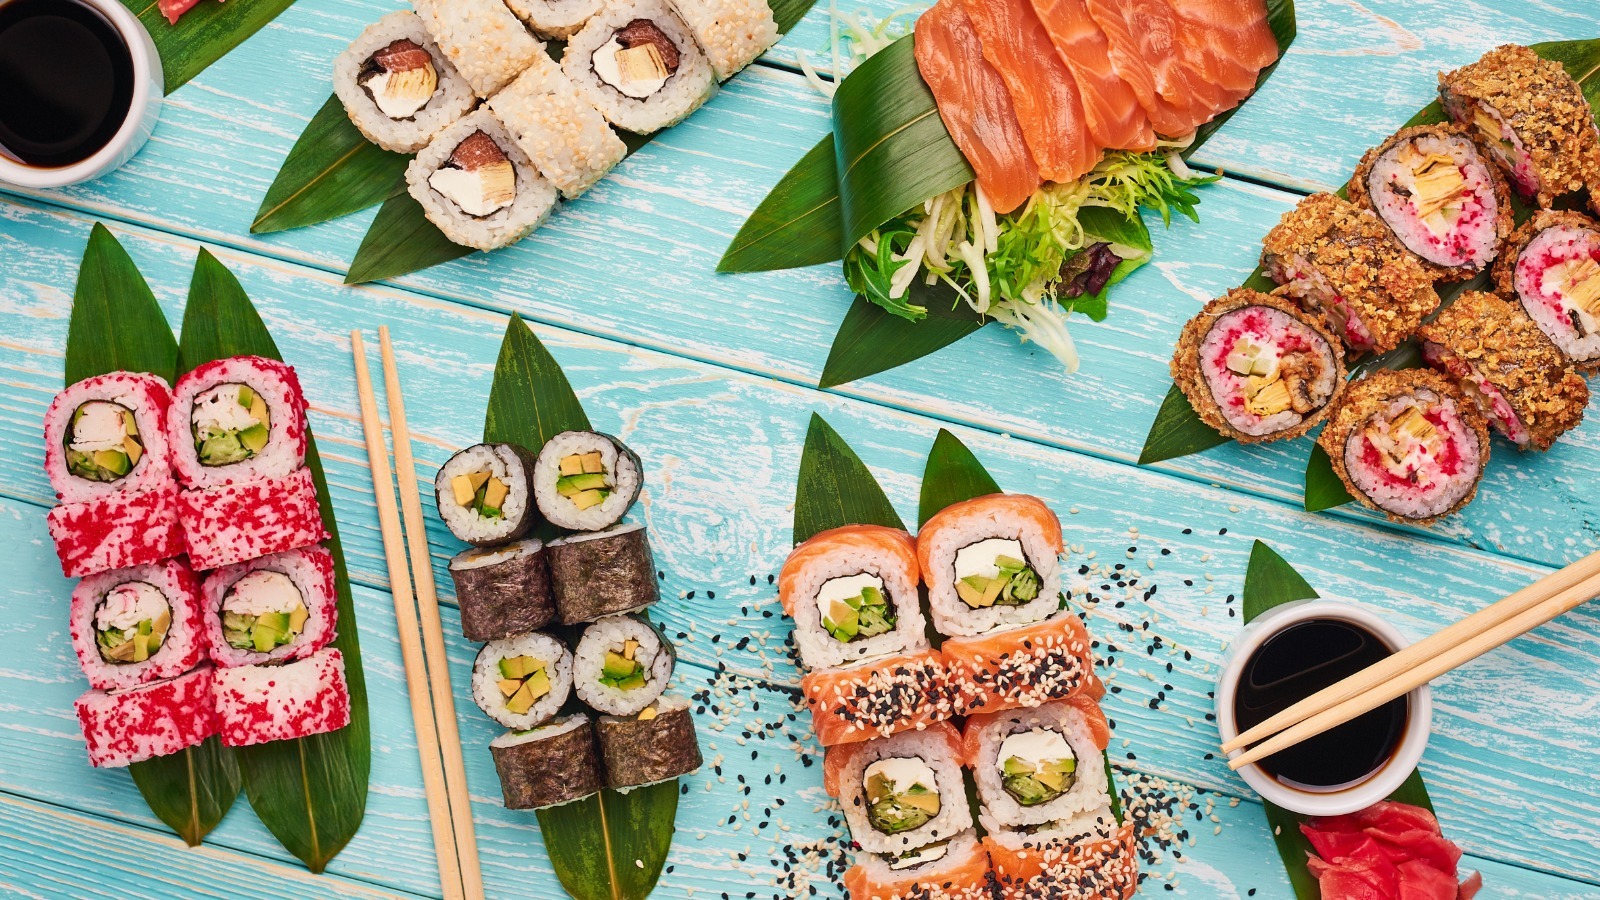 These Are The Common Mistakes To Avoid Making With Sushi